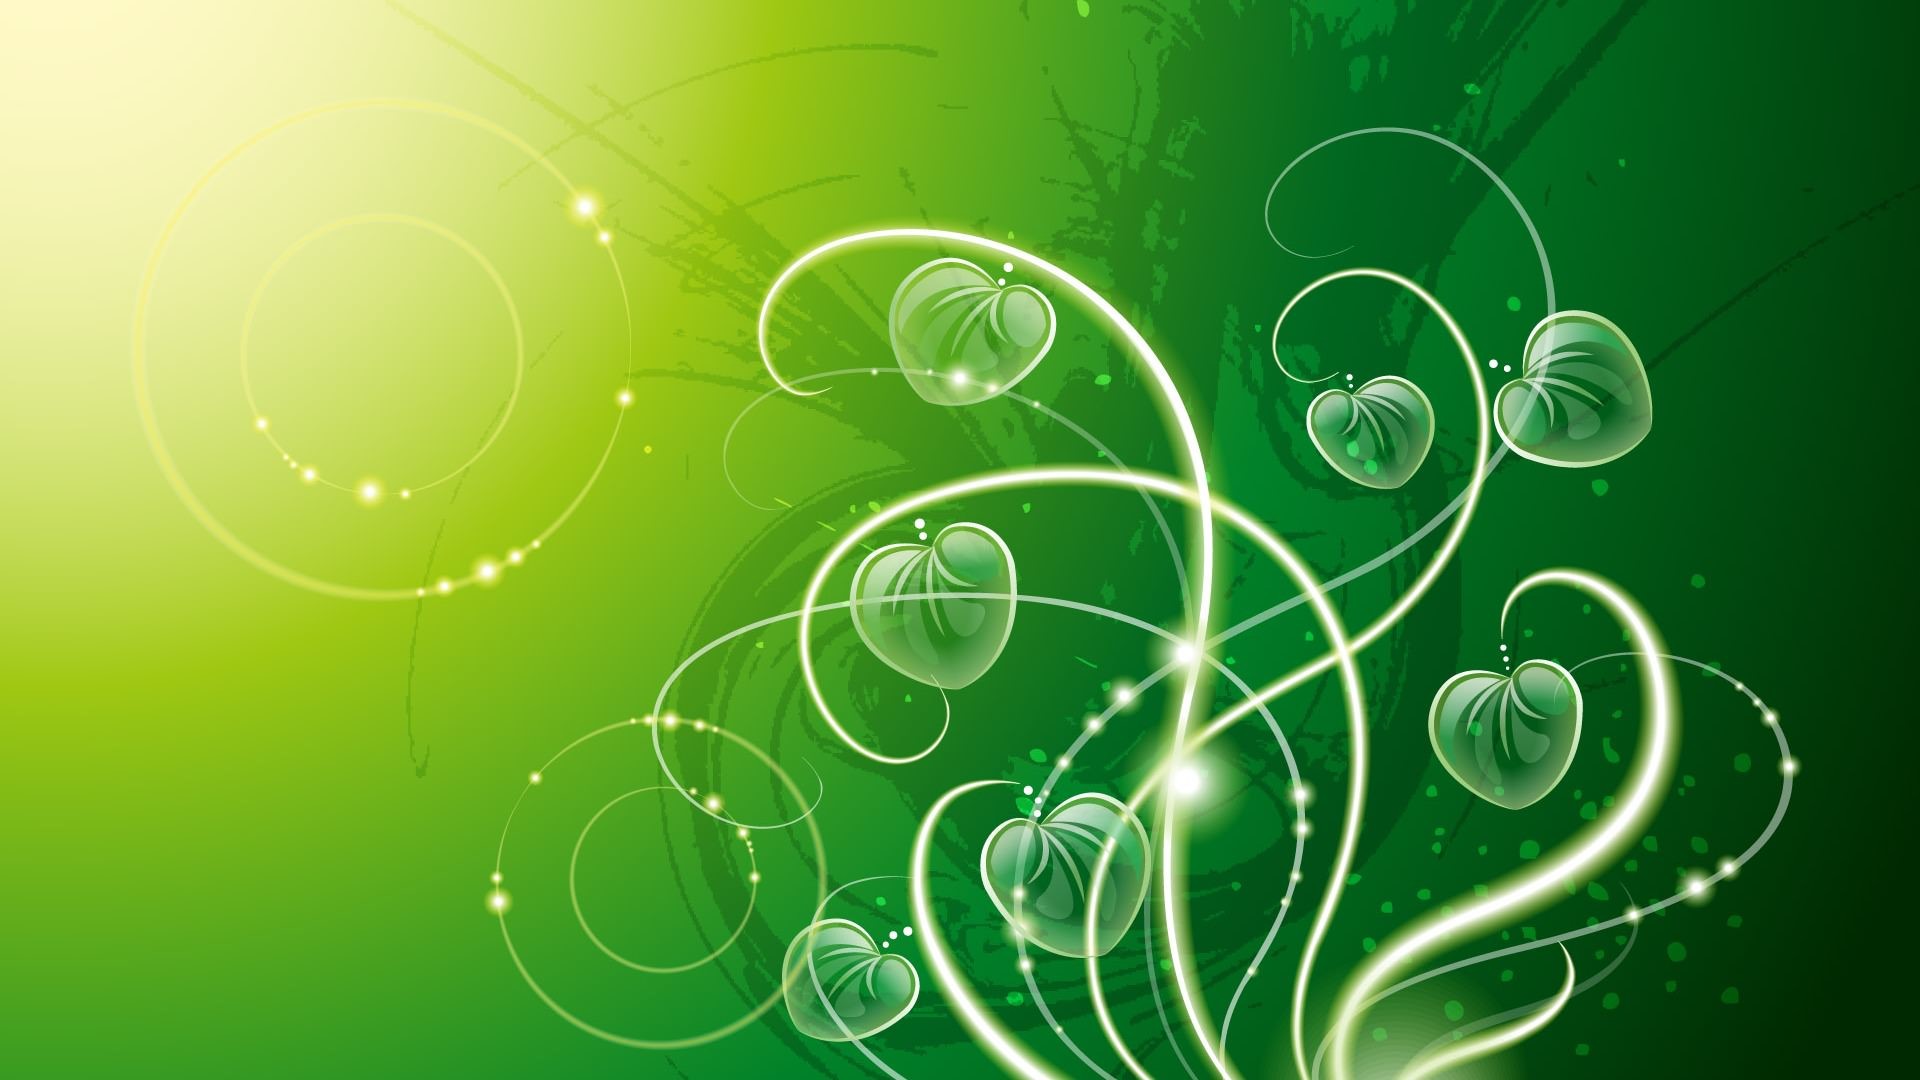 1920x1080 Green Abstract Wallpaper For Download